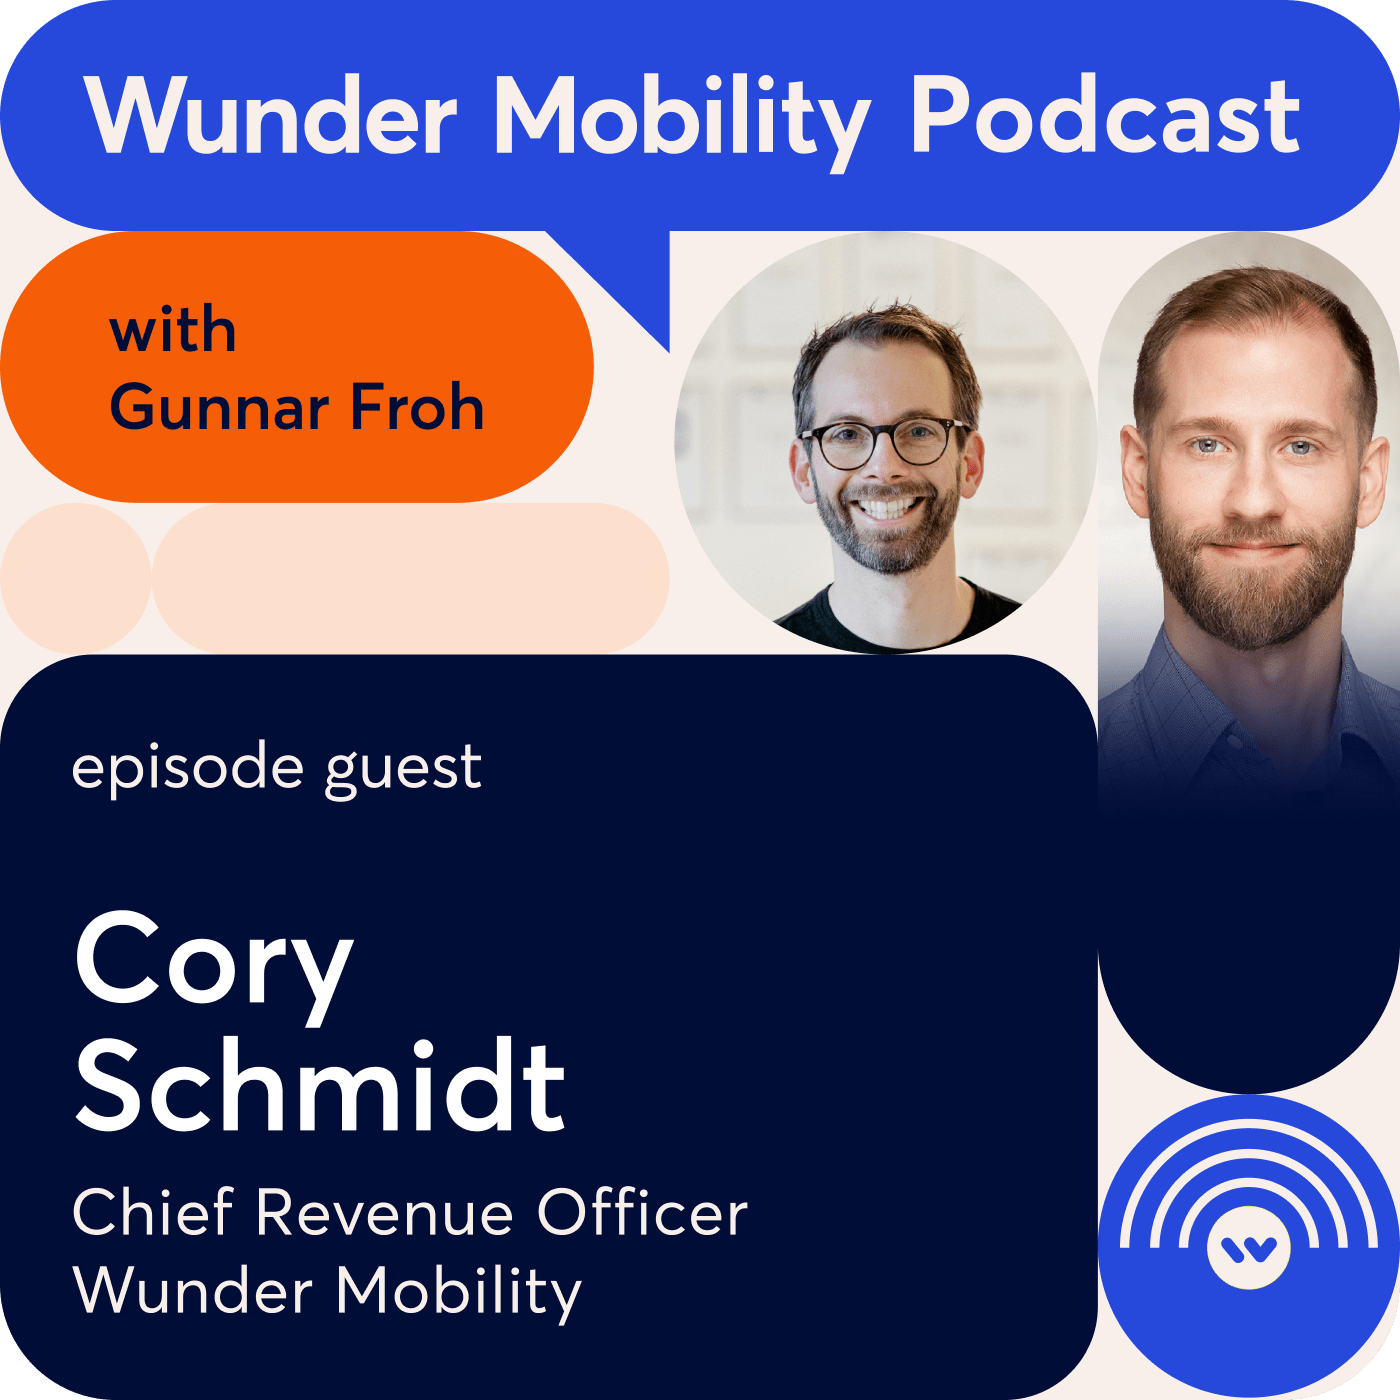 #35 Cory Schmidt, Chief Revenue Officer, Wunder Mobility